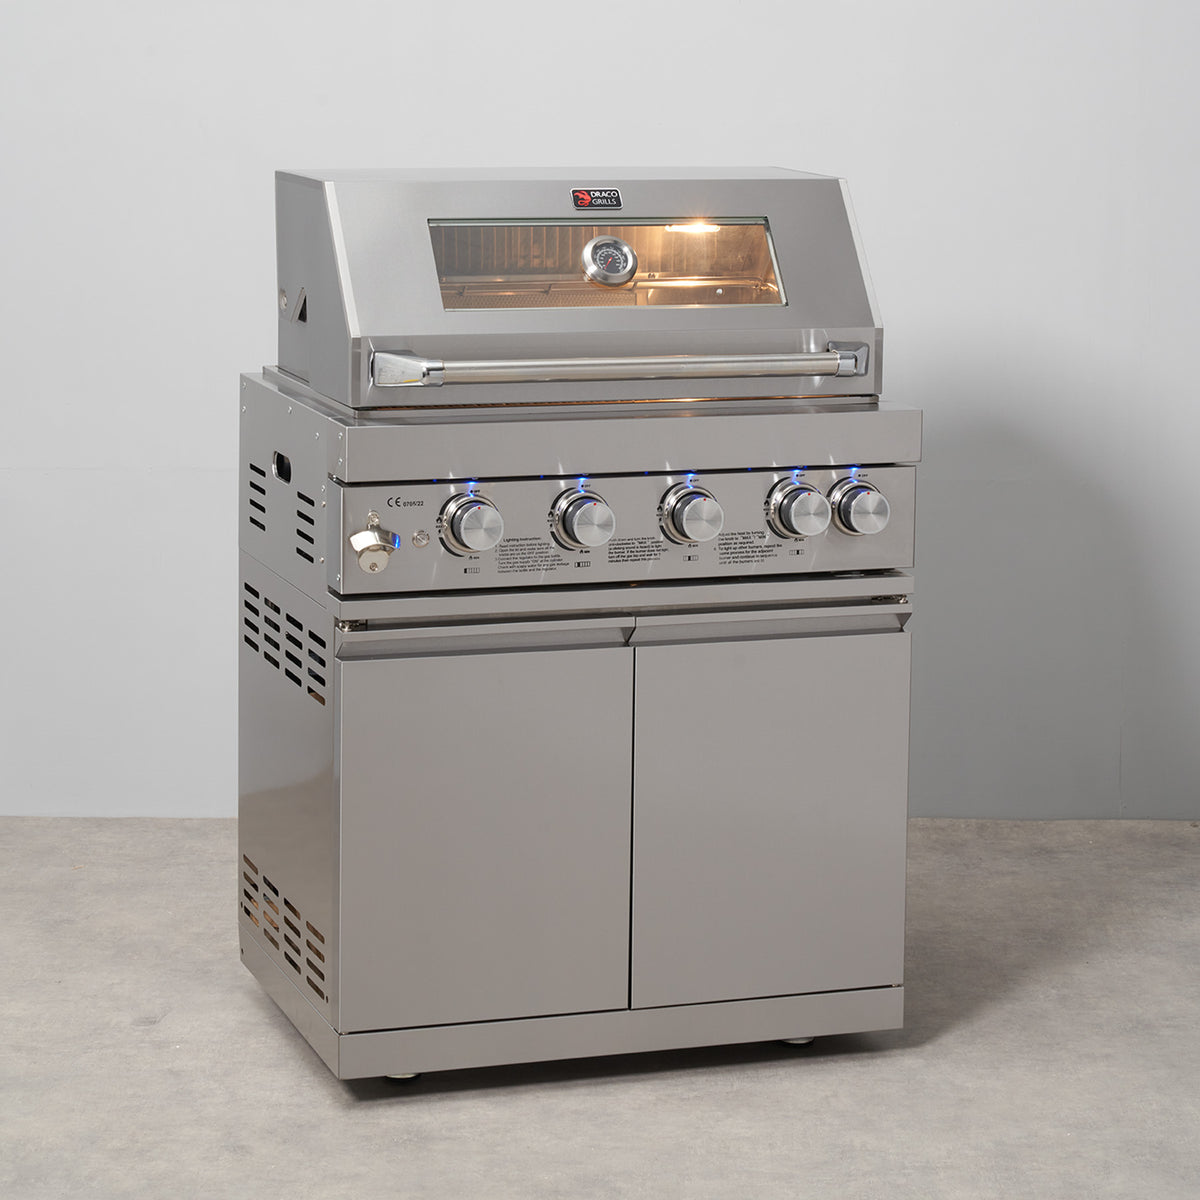 Draco Grills Z440 Deluxe 4 Burner Stainless Steel Gas Barbecue with Cabinet